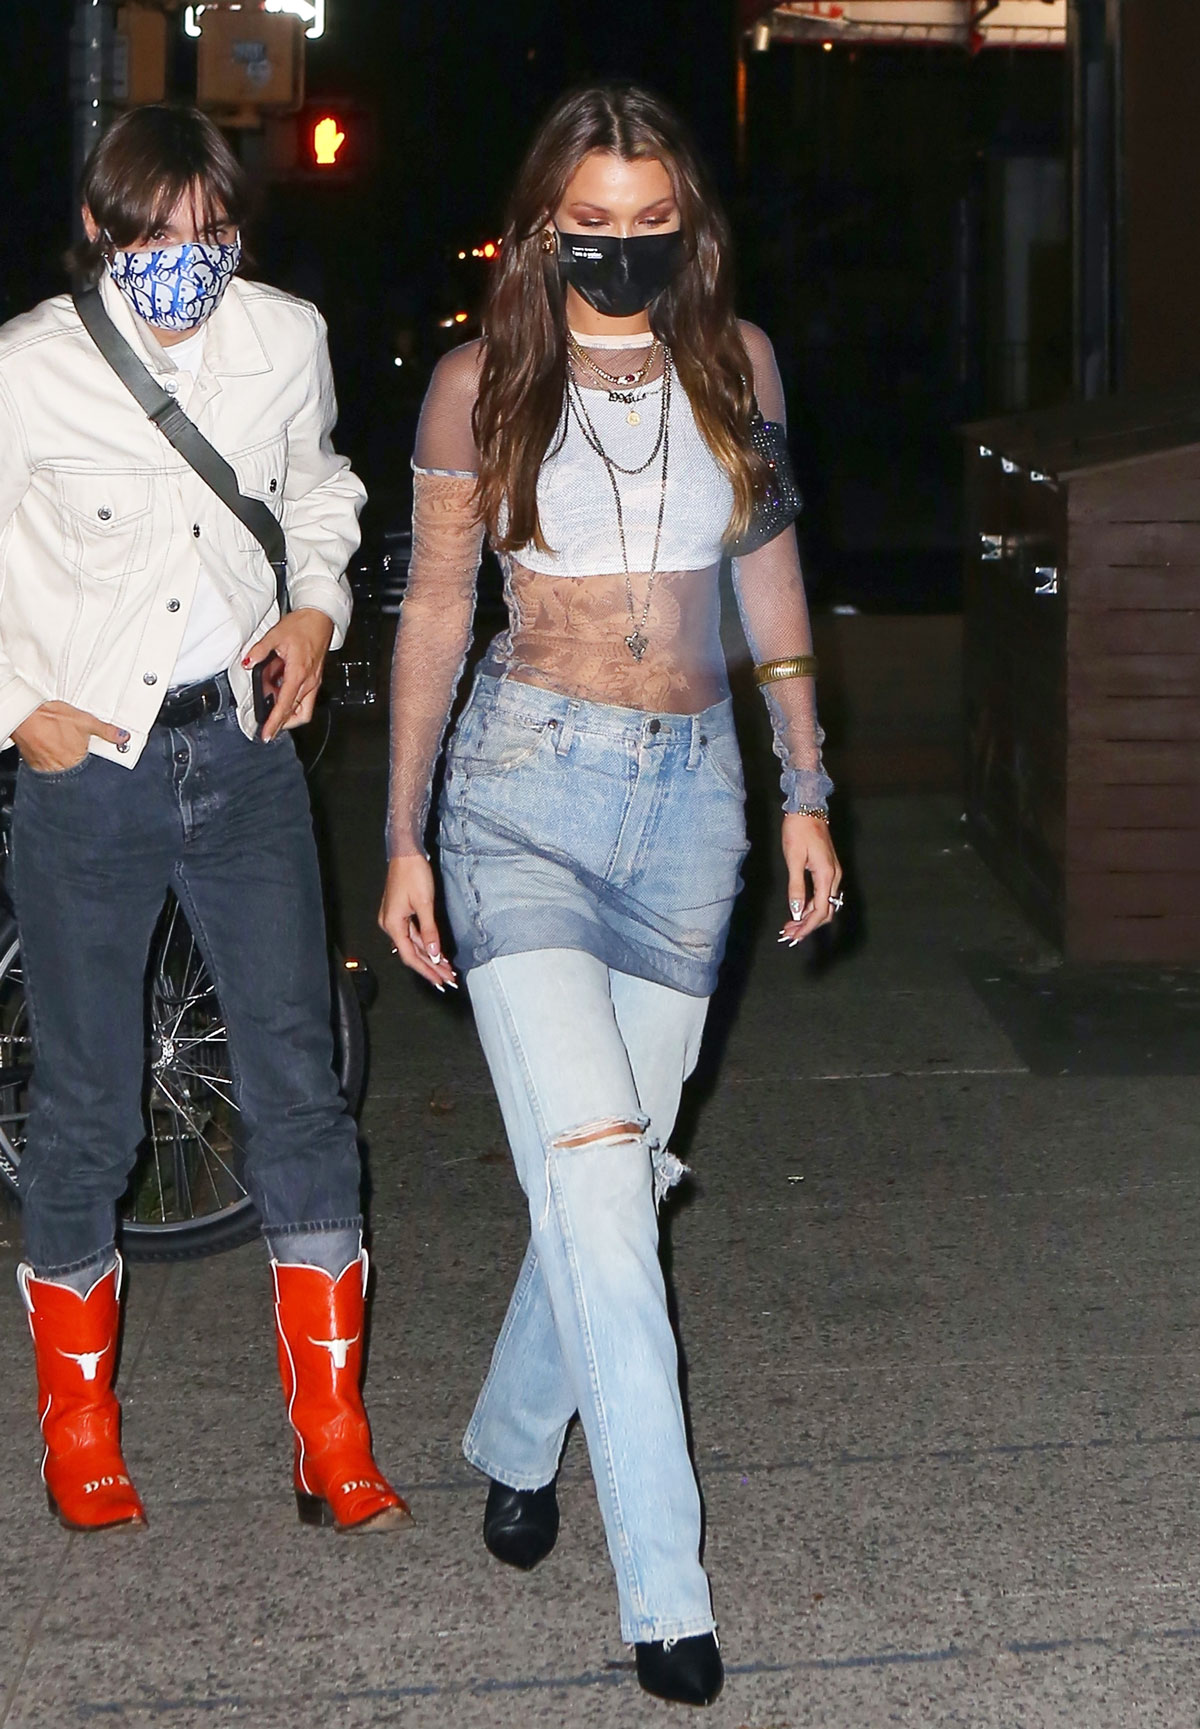 Bella Hadid wore a face mask with a sheer dress and jeans